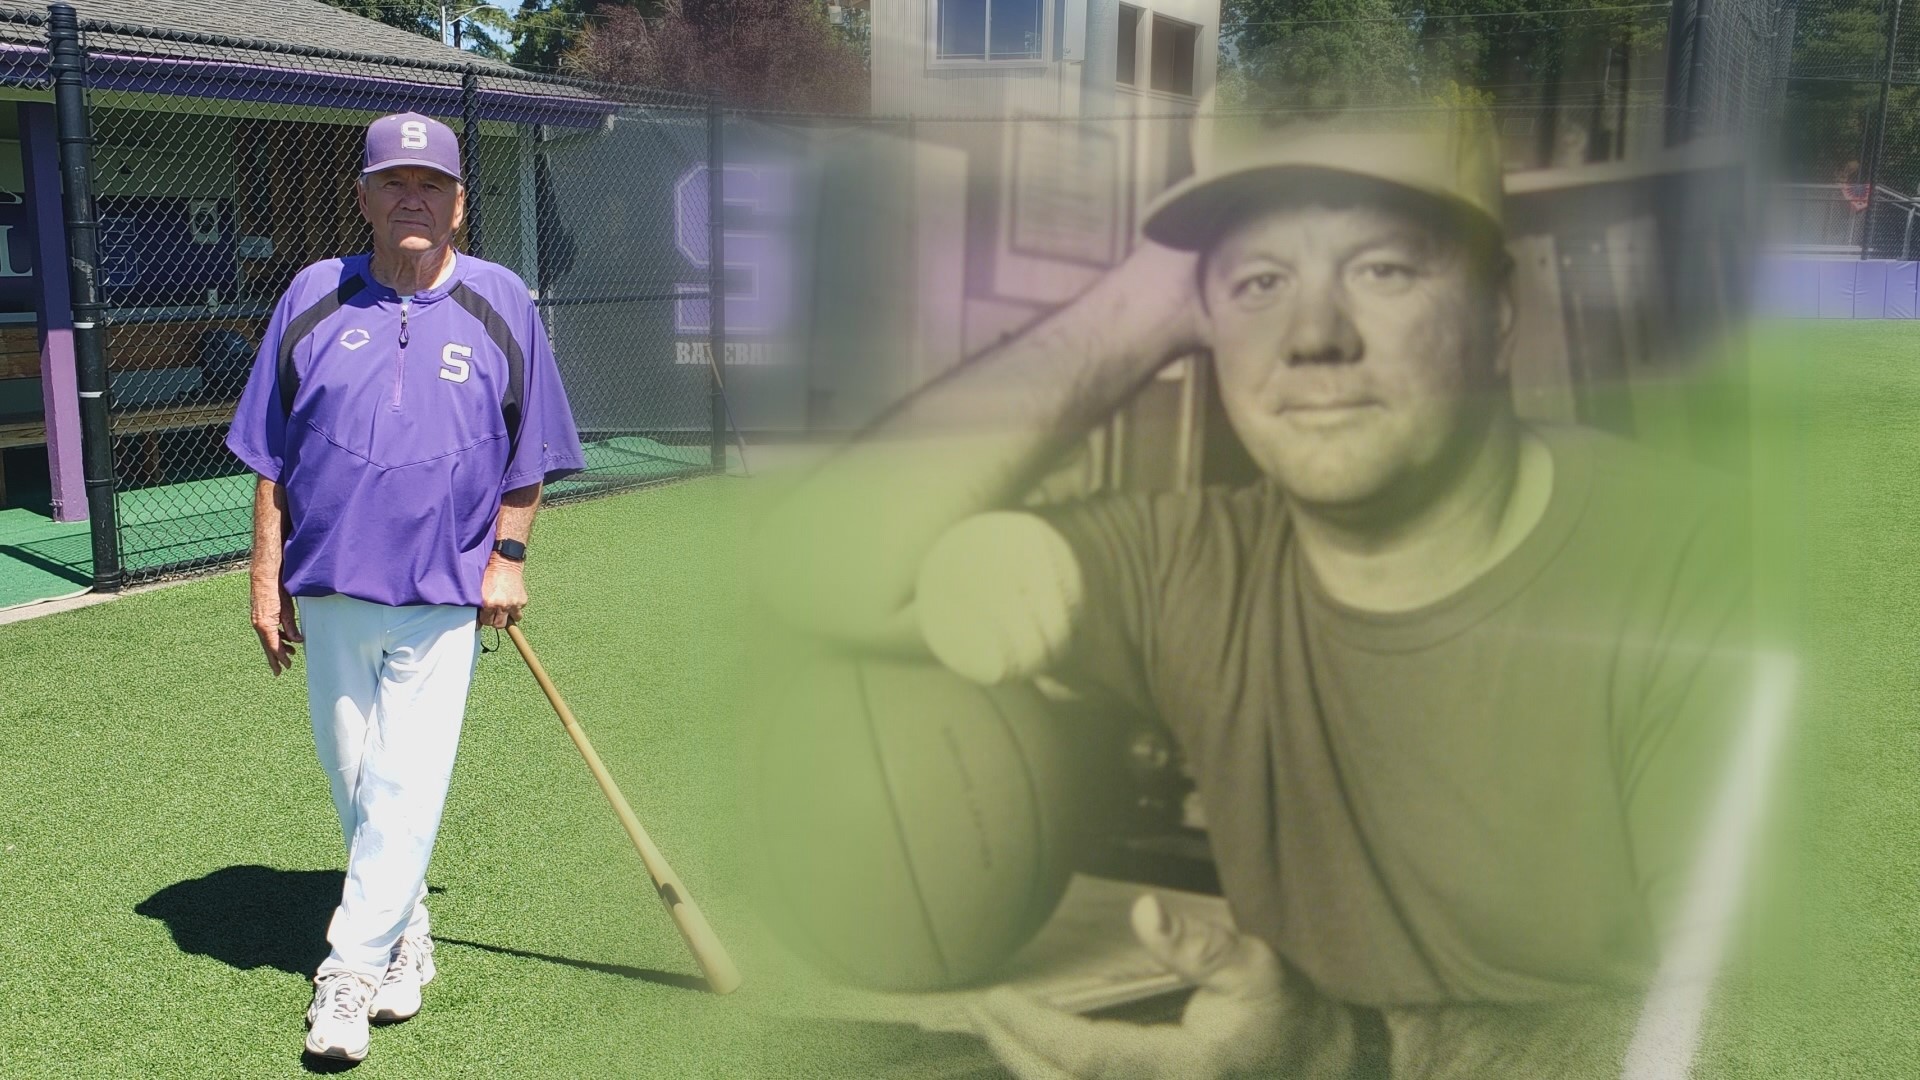 Royce McDaniel's first baseball coaching job came in 1964 when he was 25 years old. He's 83 now and coaches the freshman team at Sunset High School.